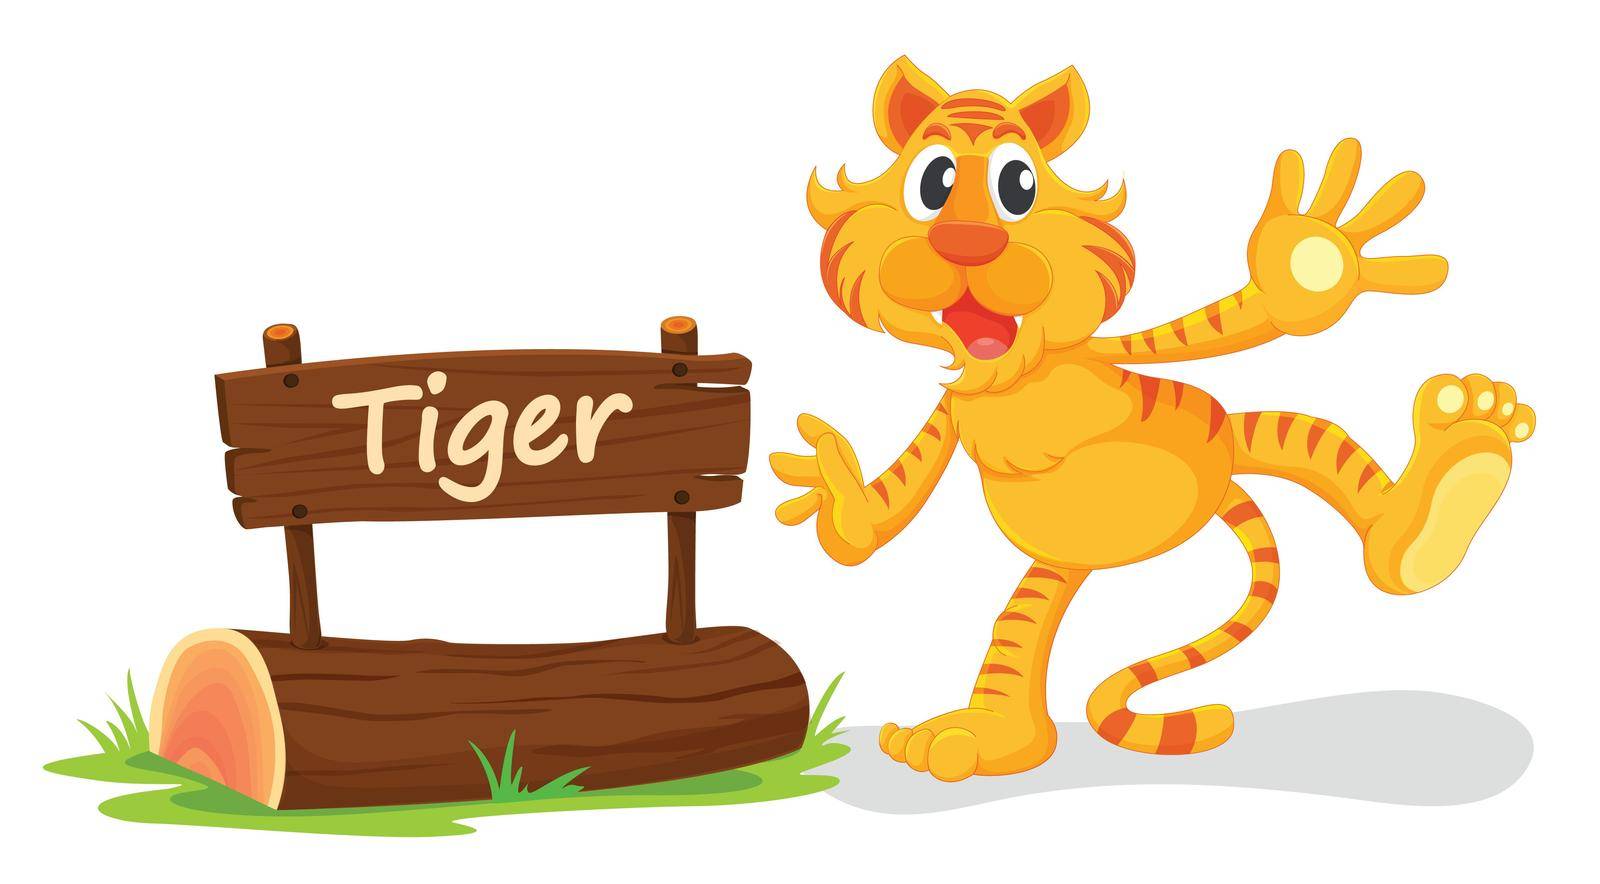 tiger and name plate by iimages